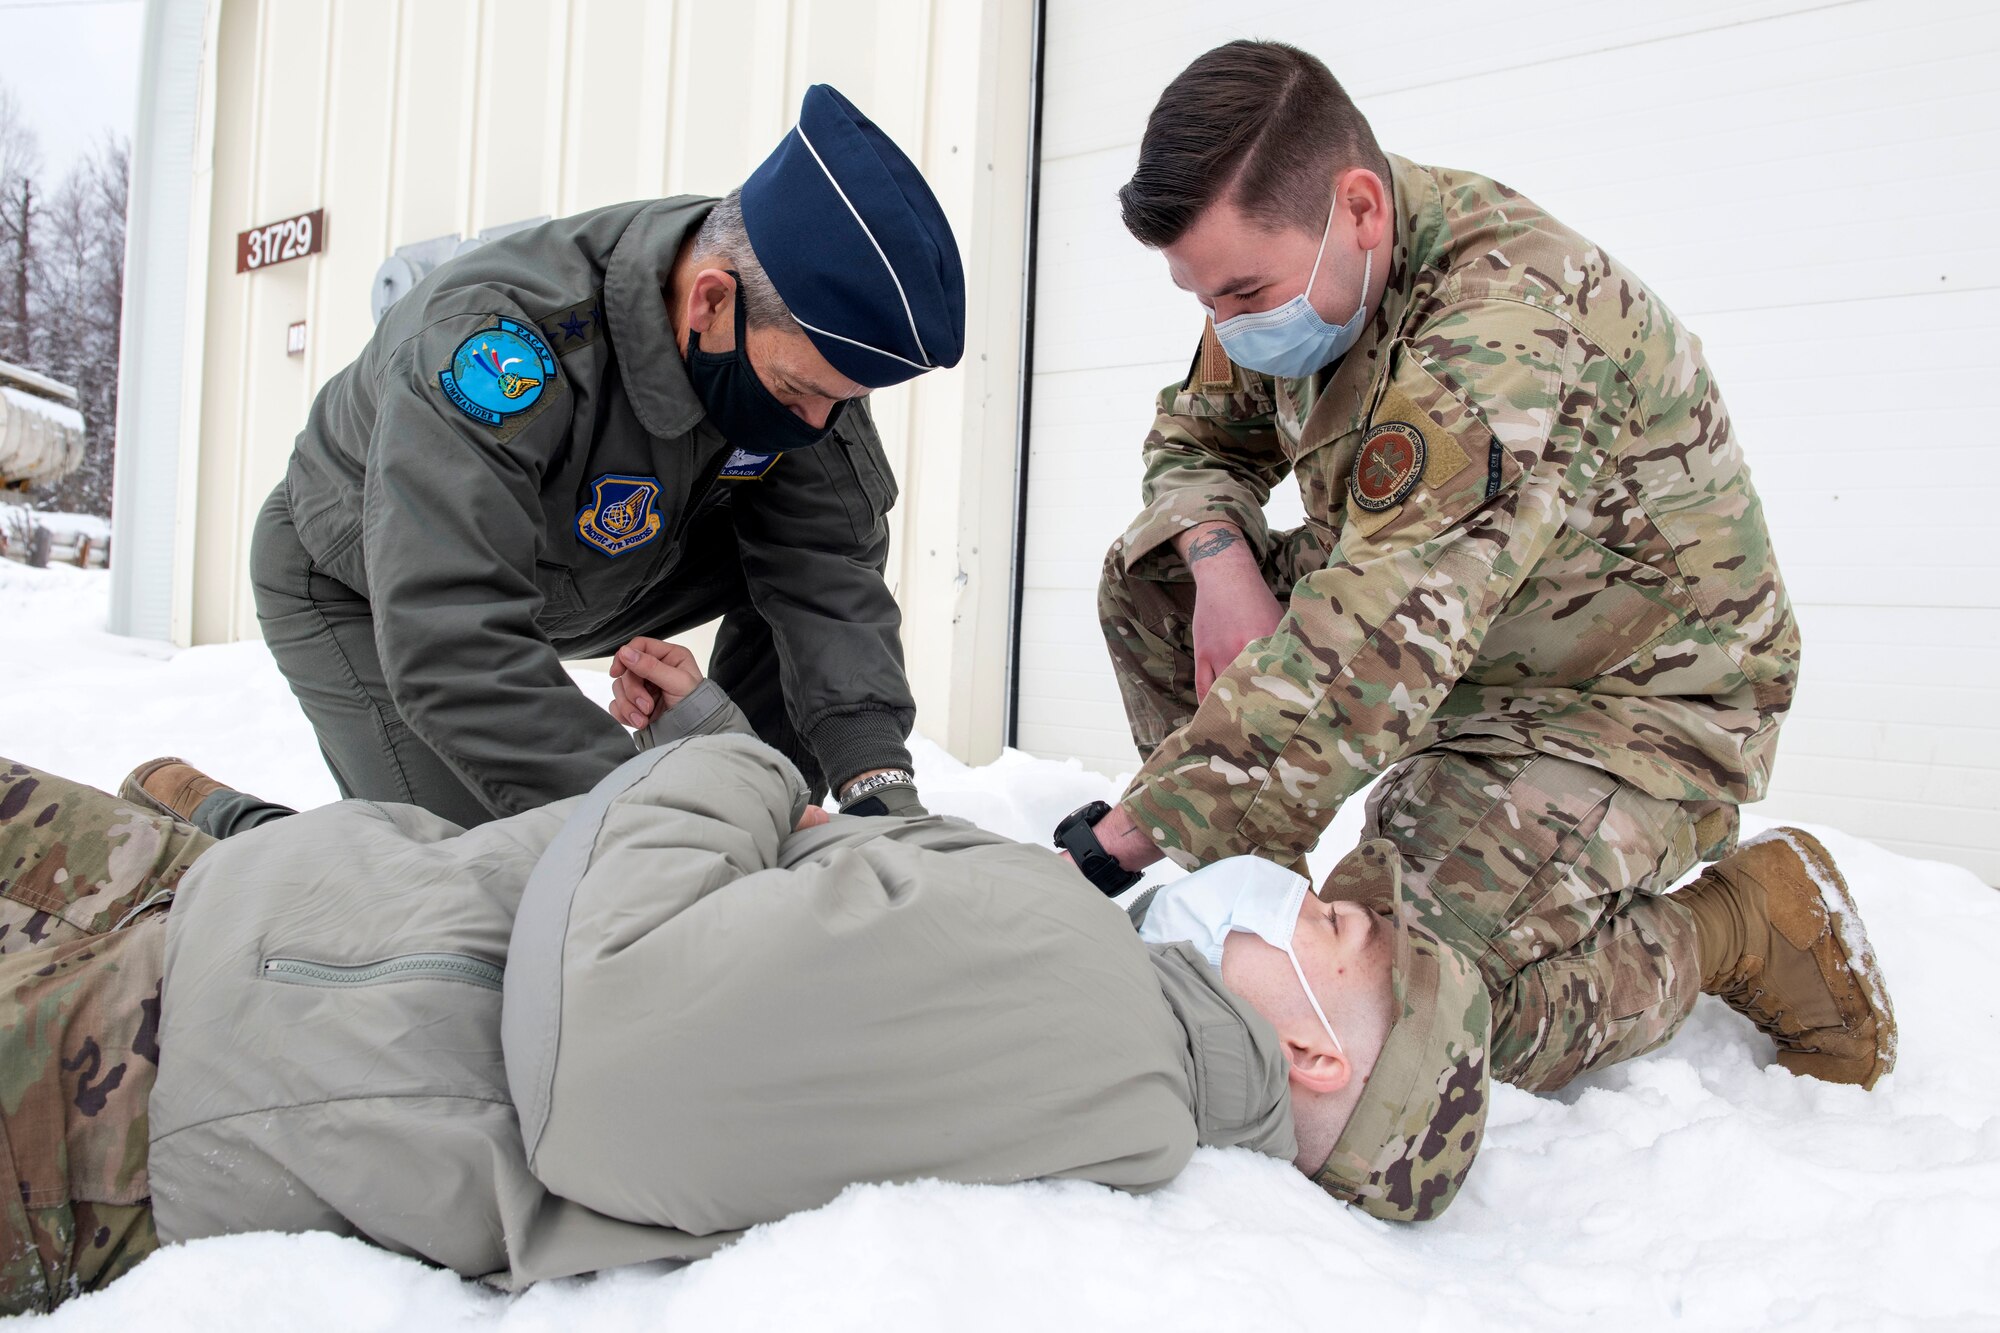 U.S. Air Force Staff Sgt. Colin Mullaly, right, an independent duty medical technician assigned to the 673d Medical Group, assists U.S. Air Force Gen. Kenneth Wilsbach, left, the Pacific Air Forces commander, with a tourniquet to show the need for the 673d MDG’s Below Zero Medicine program at Joint Base Elmendorf-Richardson, Alaska, Feb. 16, 2021. PACAF leadership conducted an immersion tour of JBER to learn about the installation's role in readiness and defense in the Arctic as well as how the base remains poised for the future through innovative ideas.